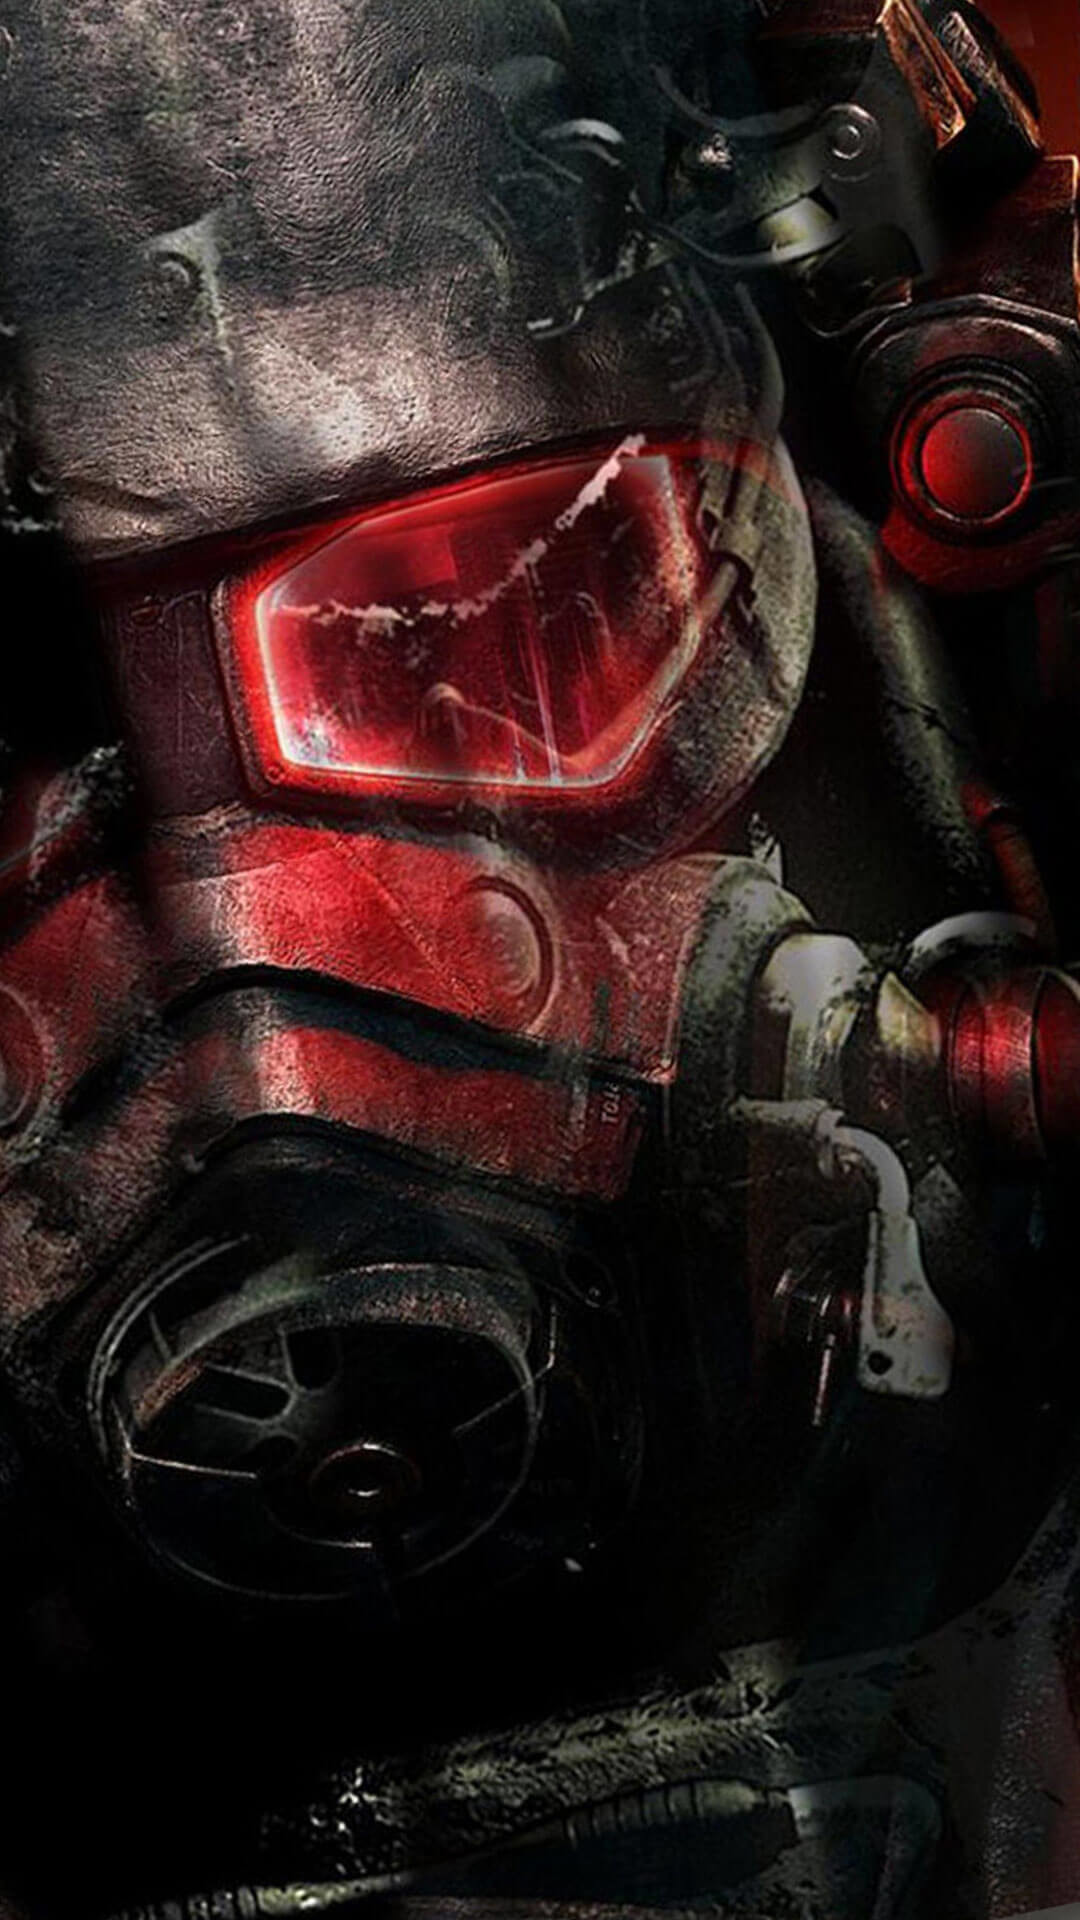 fallout 4 wallpaper,fictional character,personal protective equipment,illustration,cg artwork,gas mask